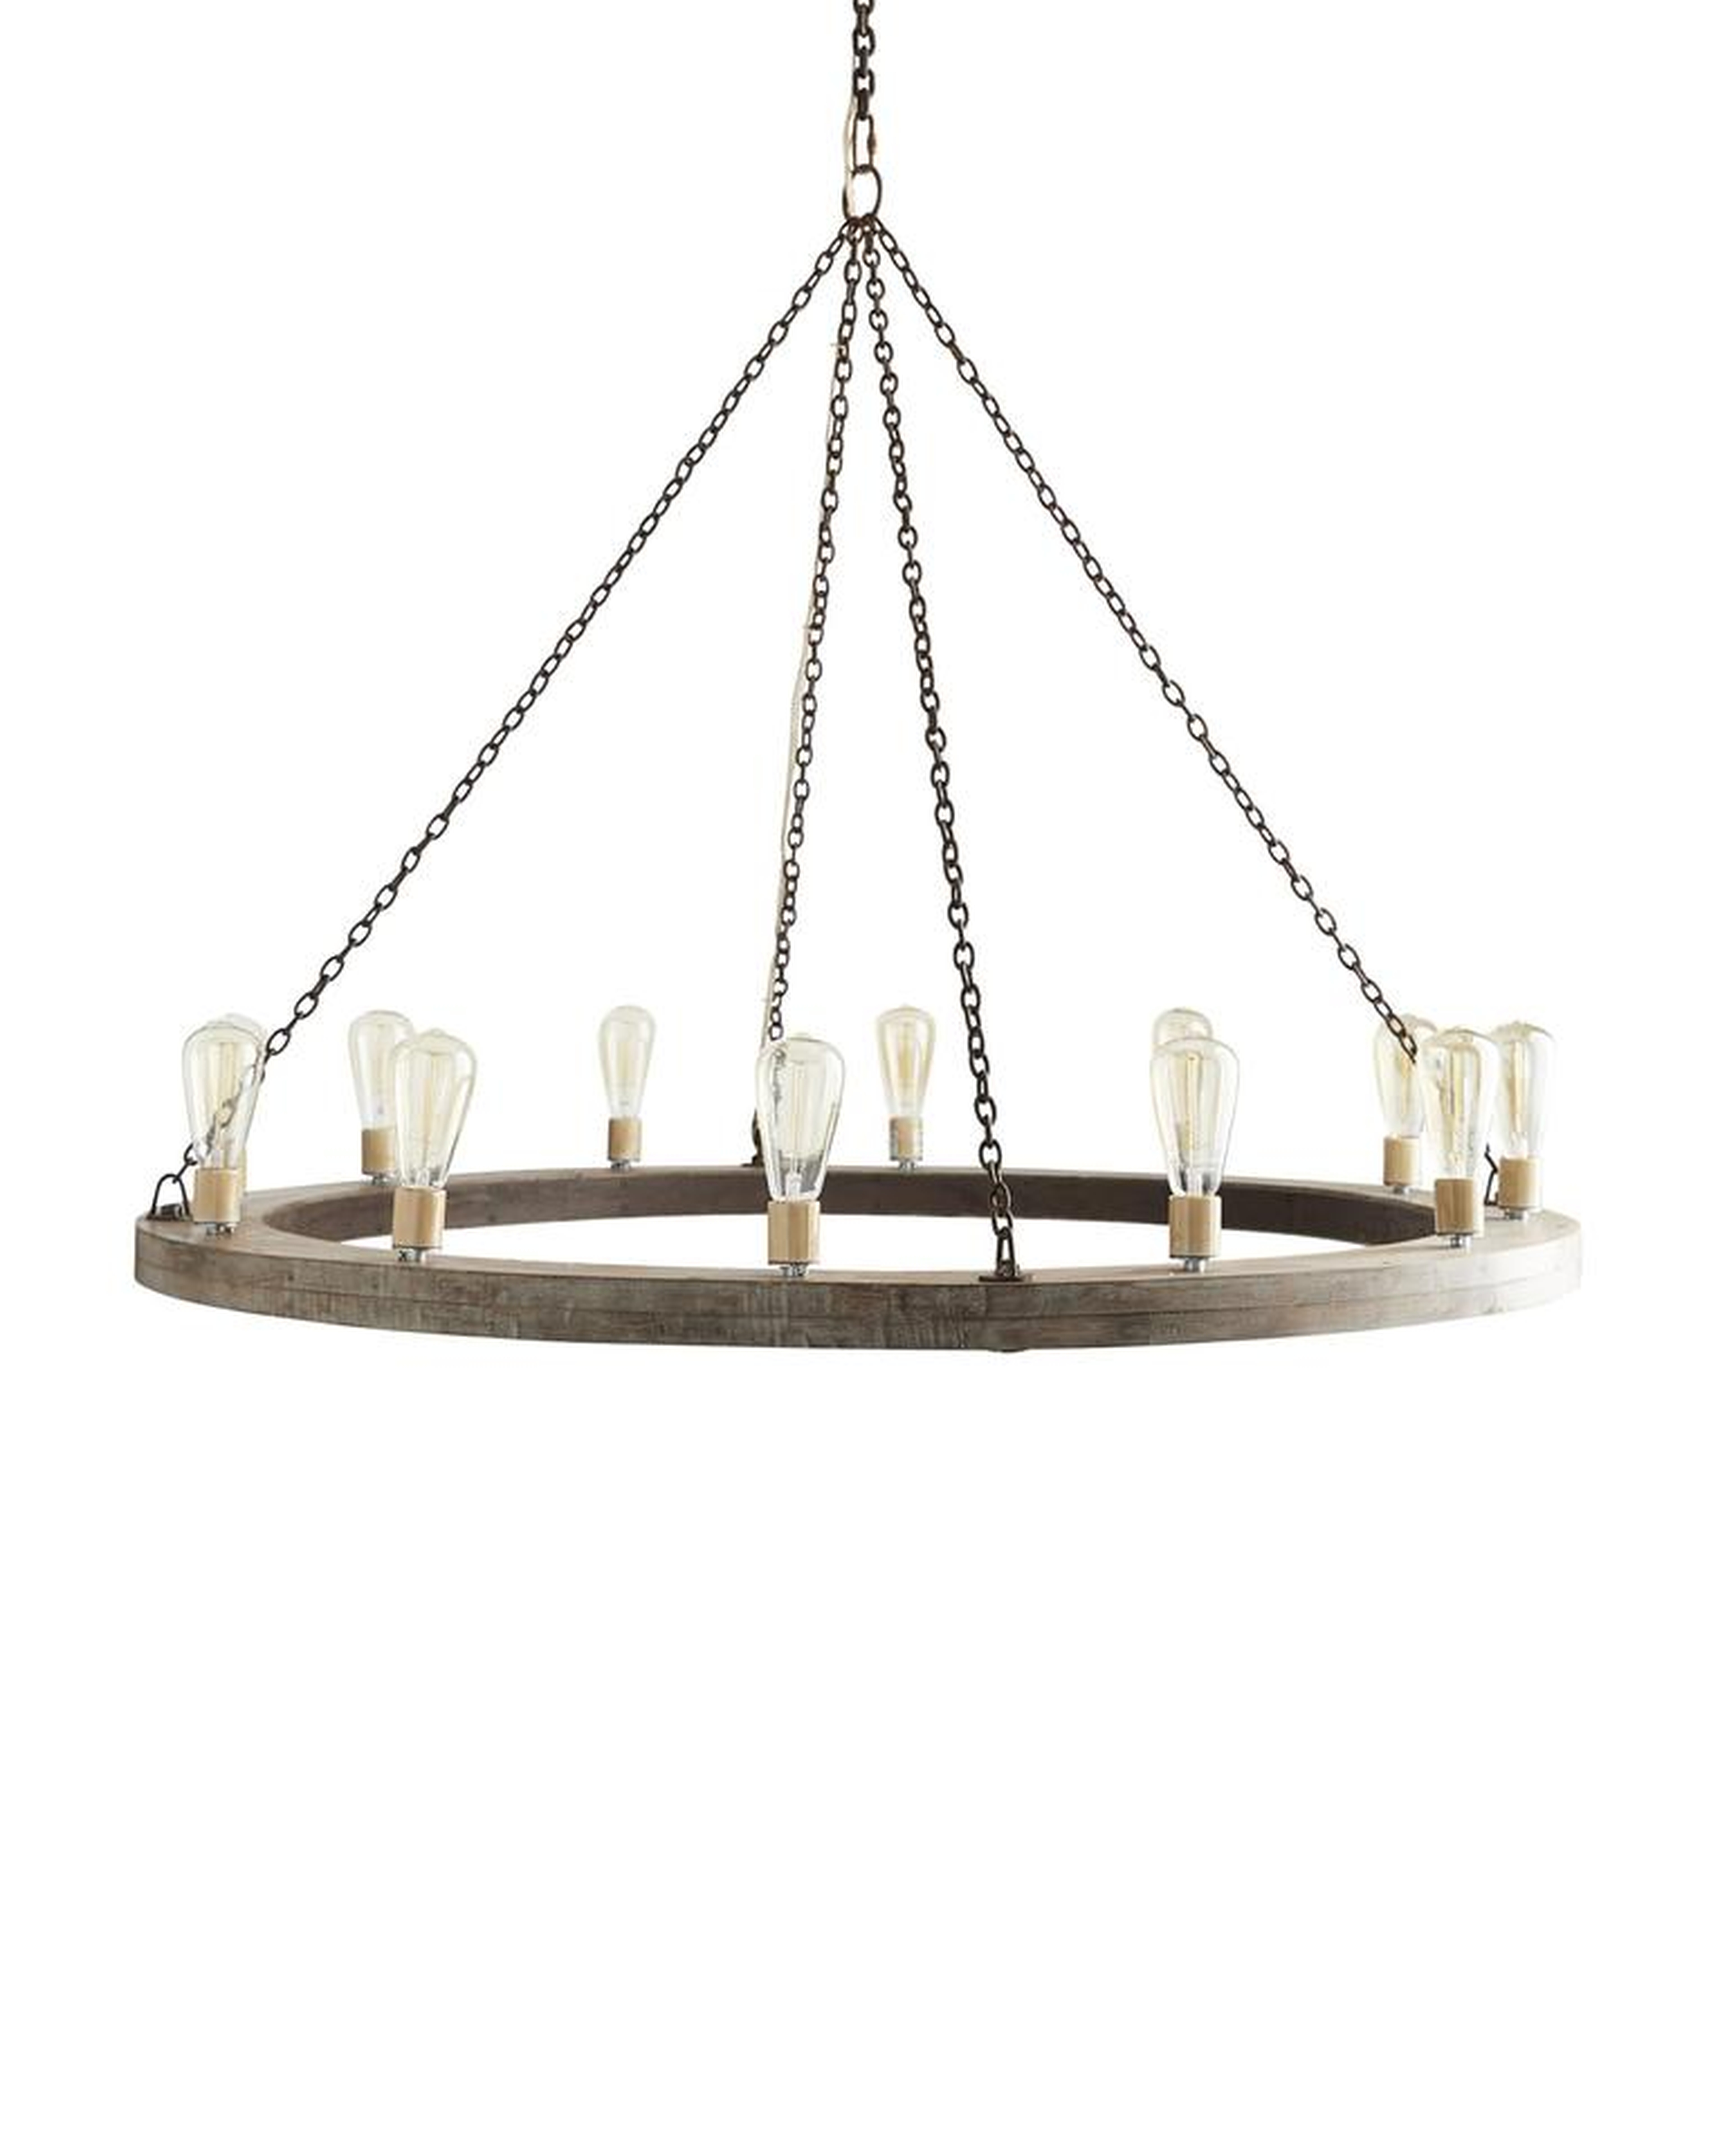 GEOFFREY SMALL CHANDELIER - McGee & Co.